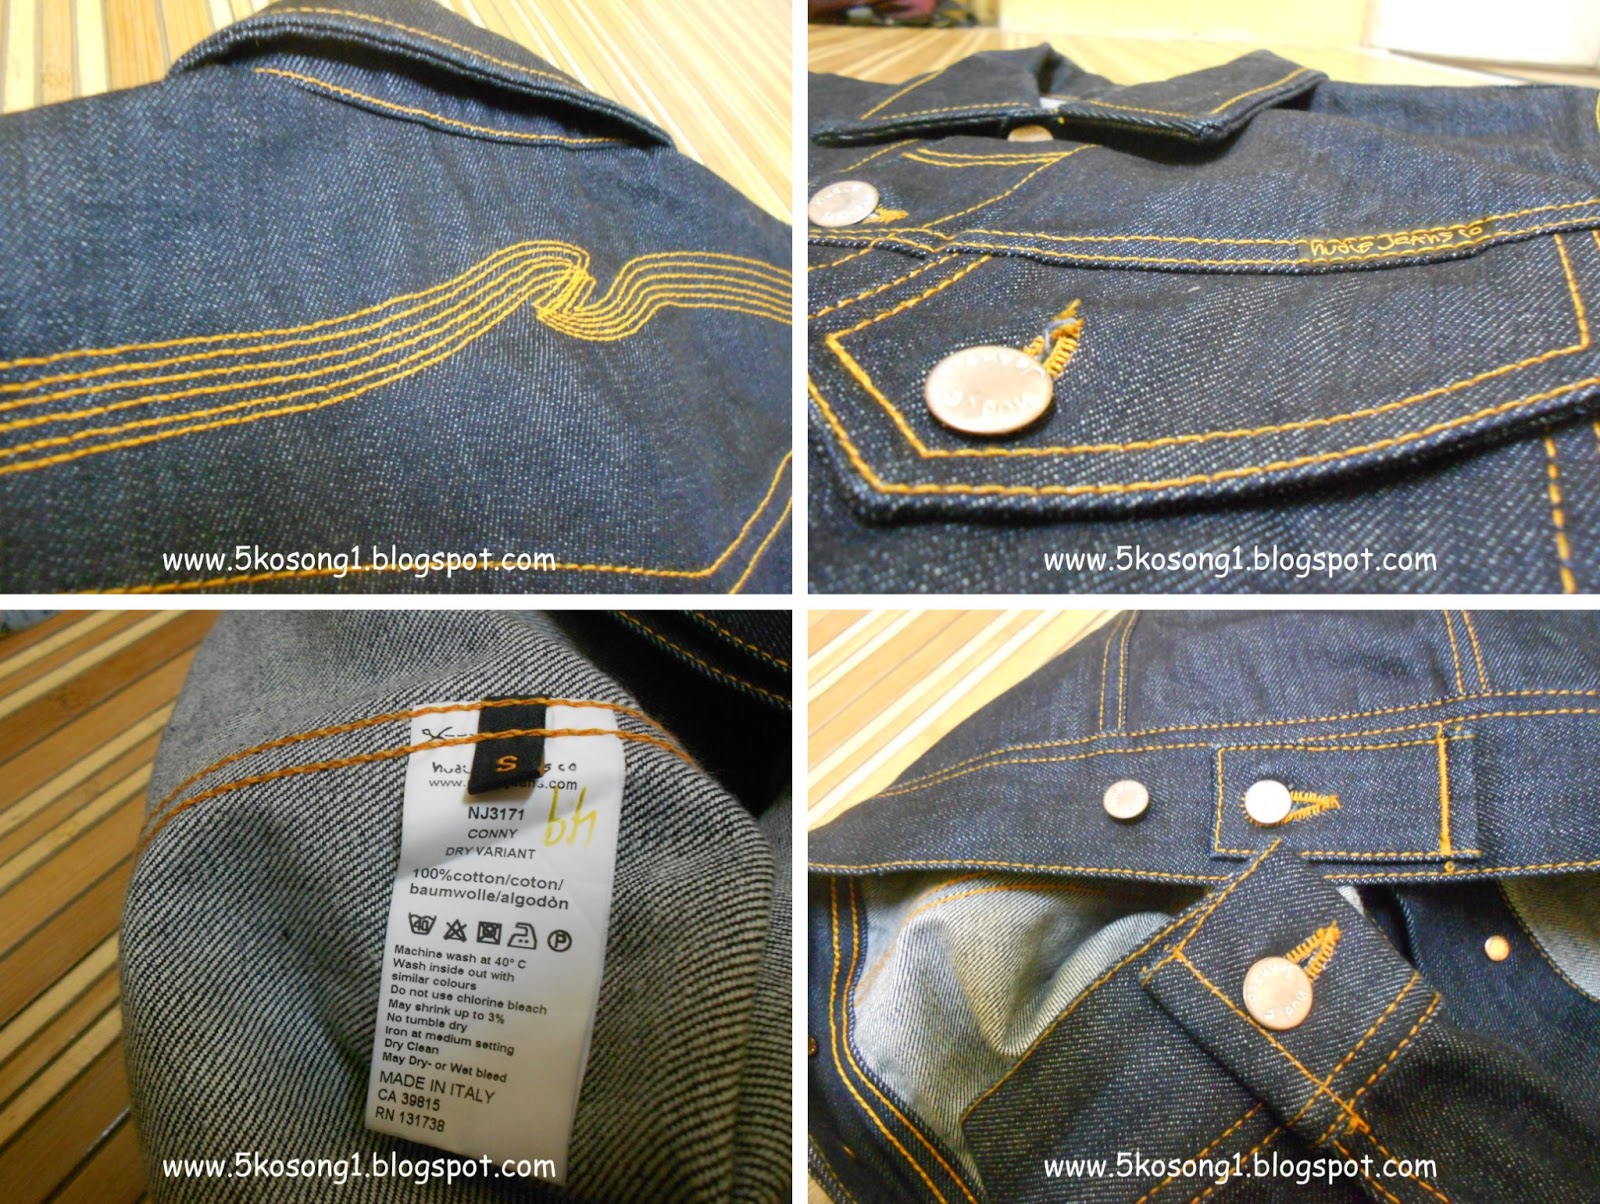 5kosong1: Nudie Jeans Conny Dry Variant Jacket -Size S-